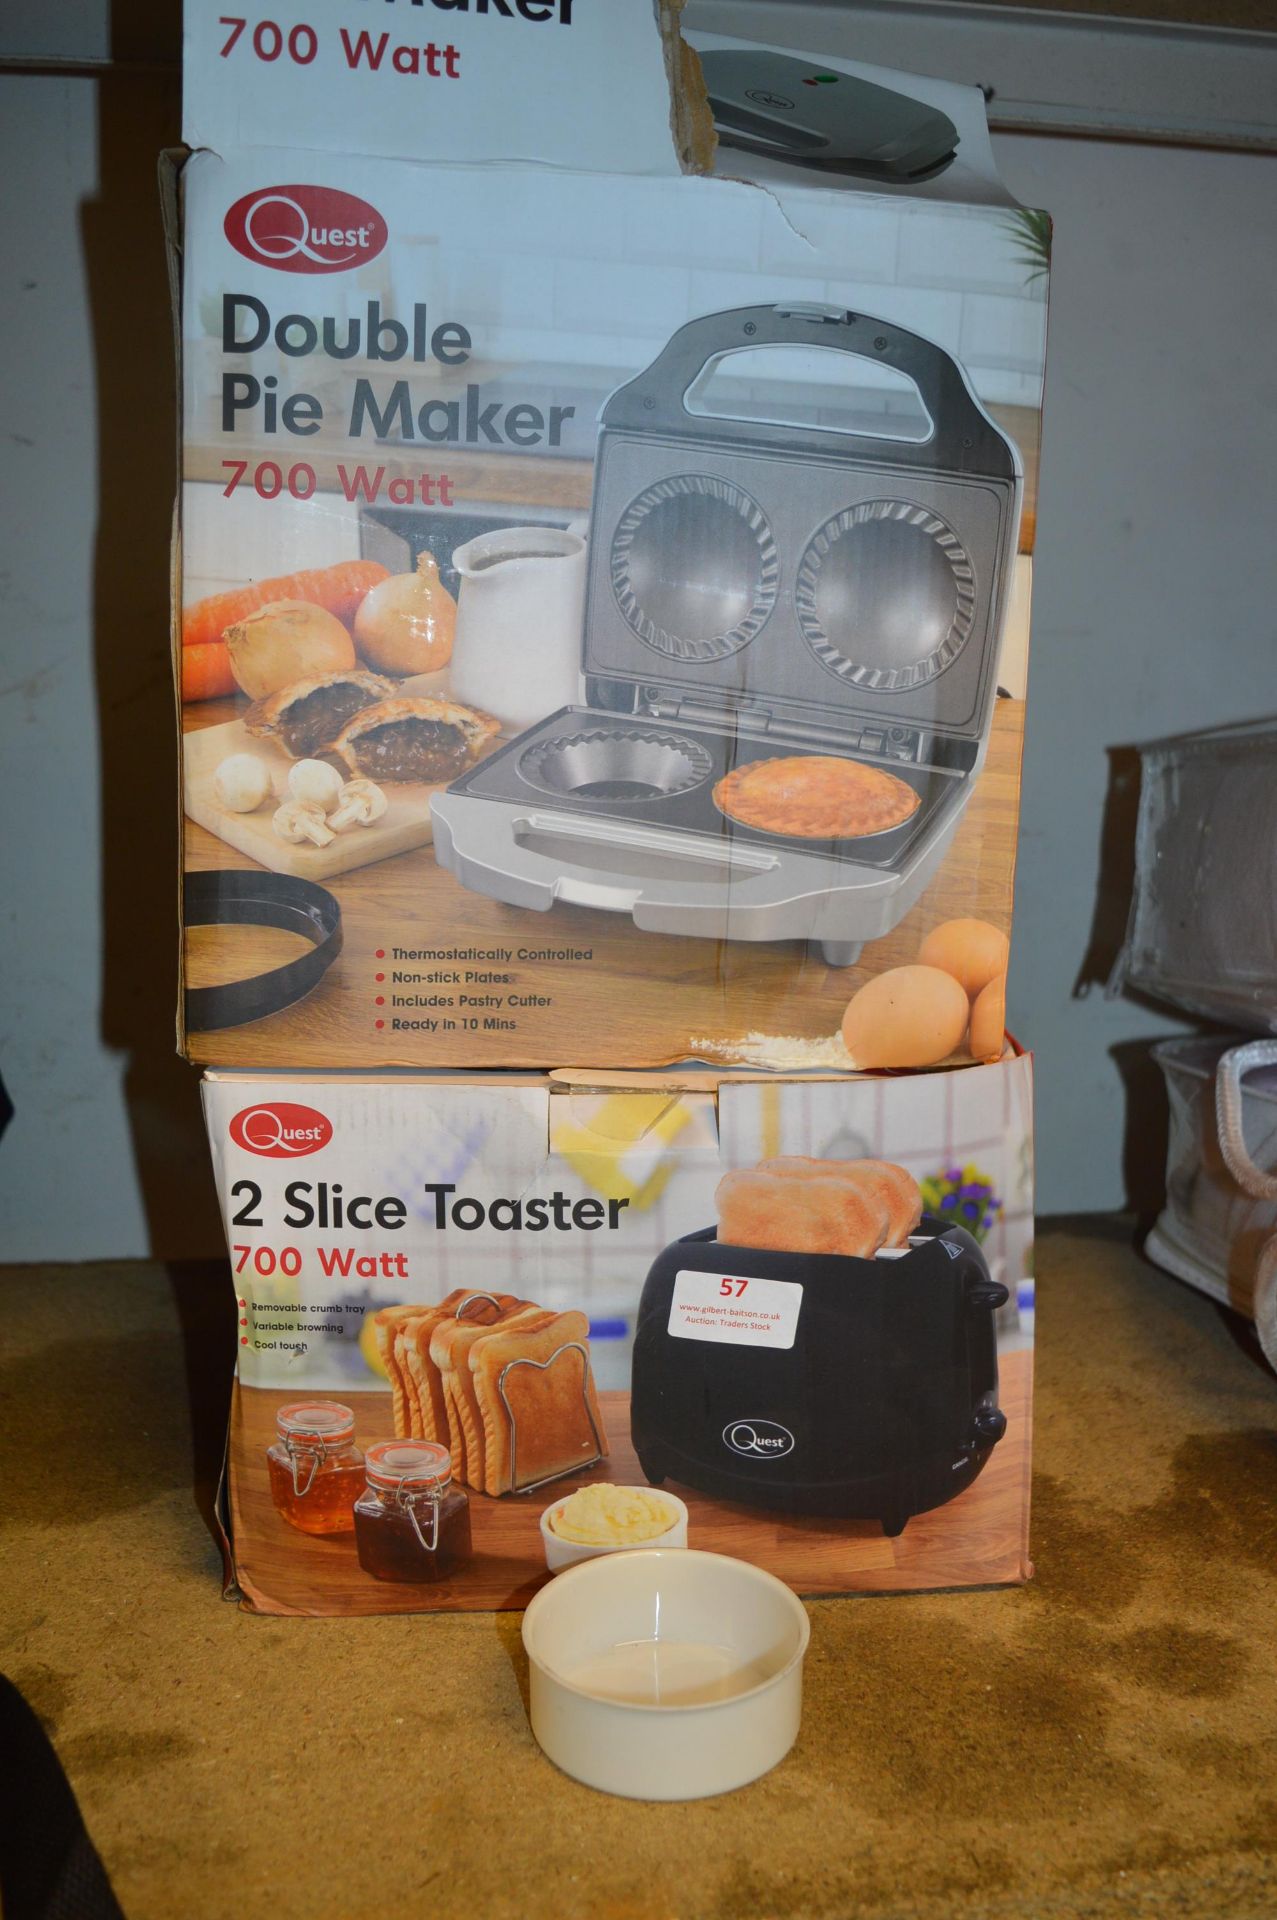 *Double Pie Maker and a Two Slice Toaster